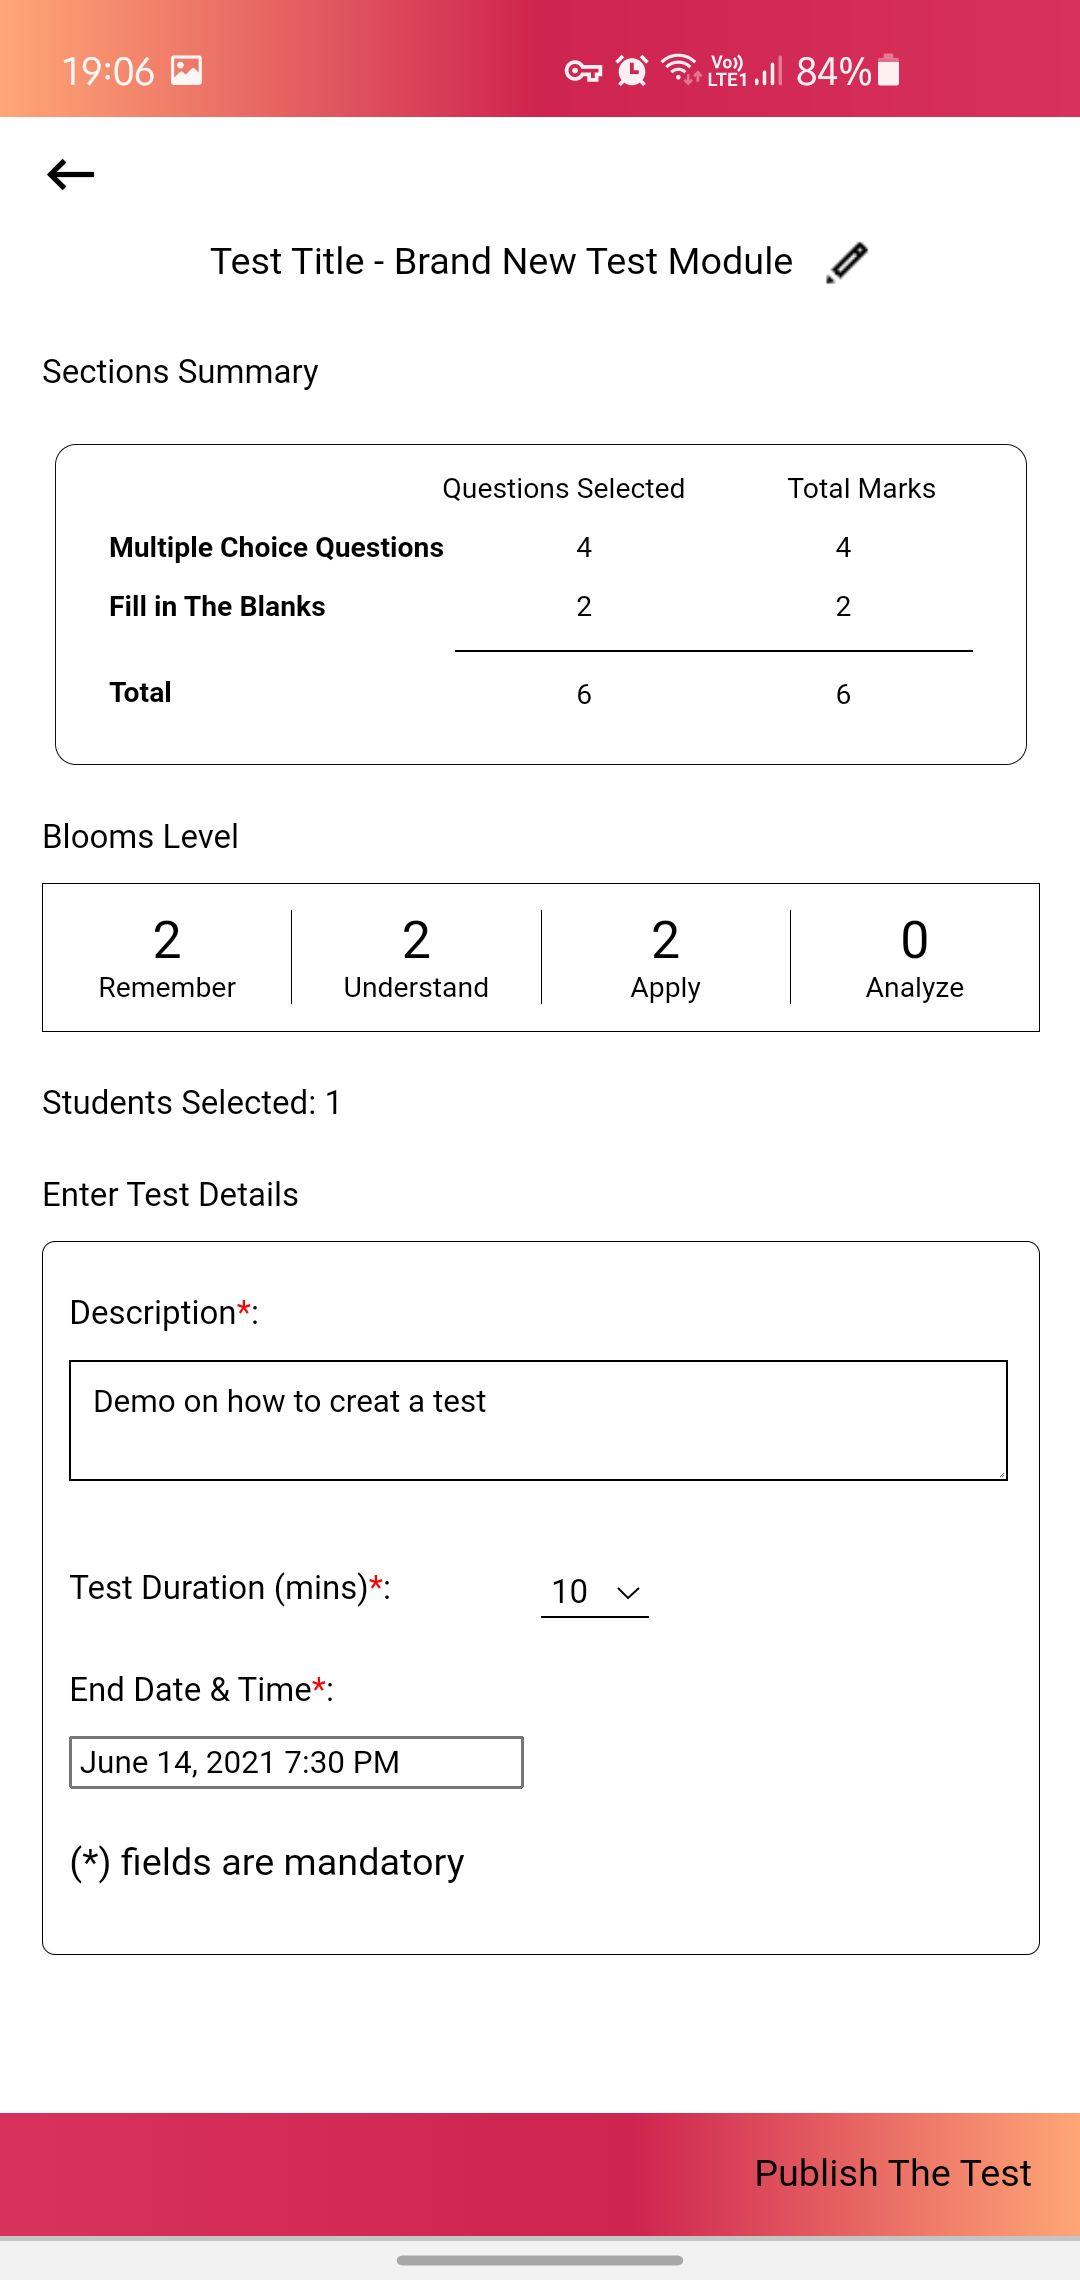 17. Click on “Publish The Test” to Push the Test to Students